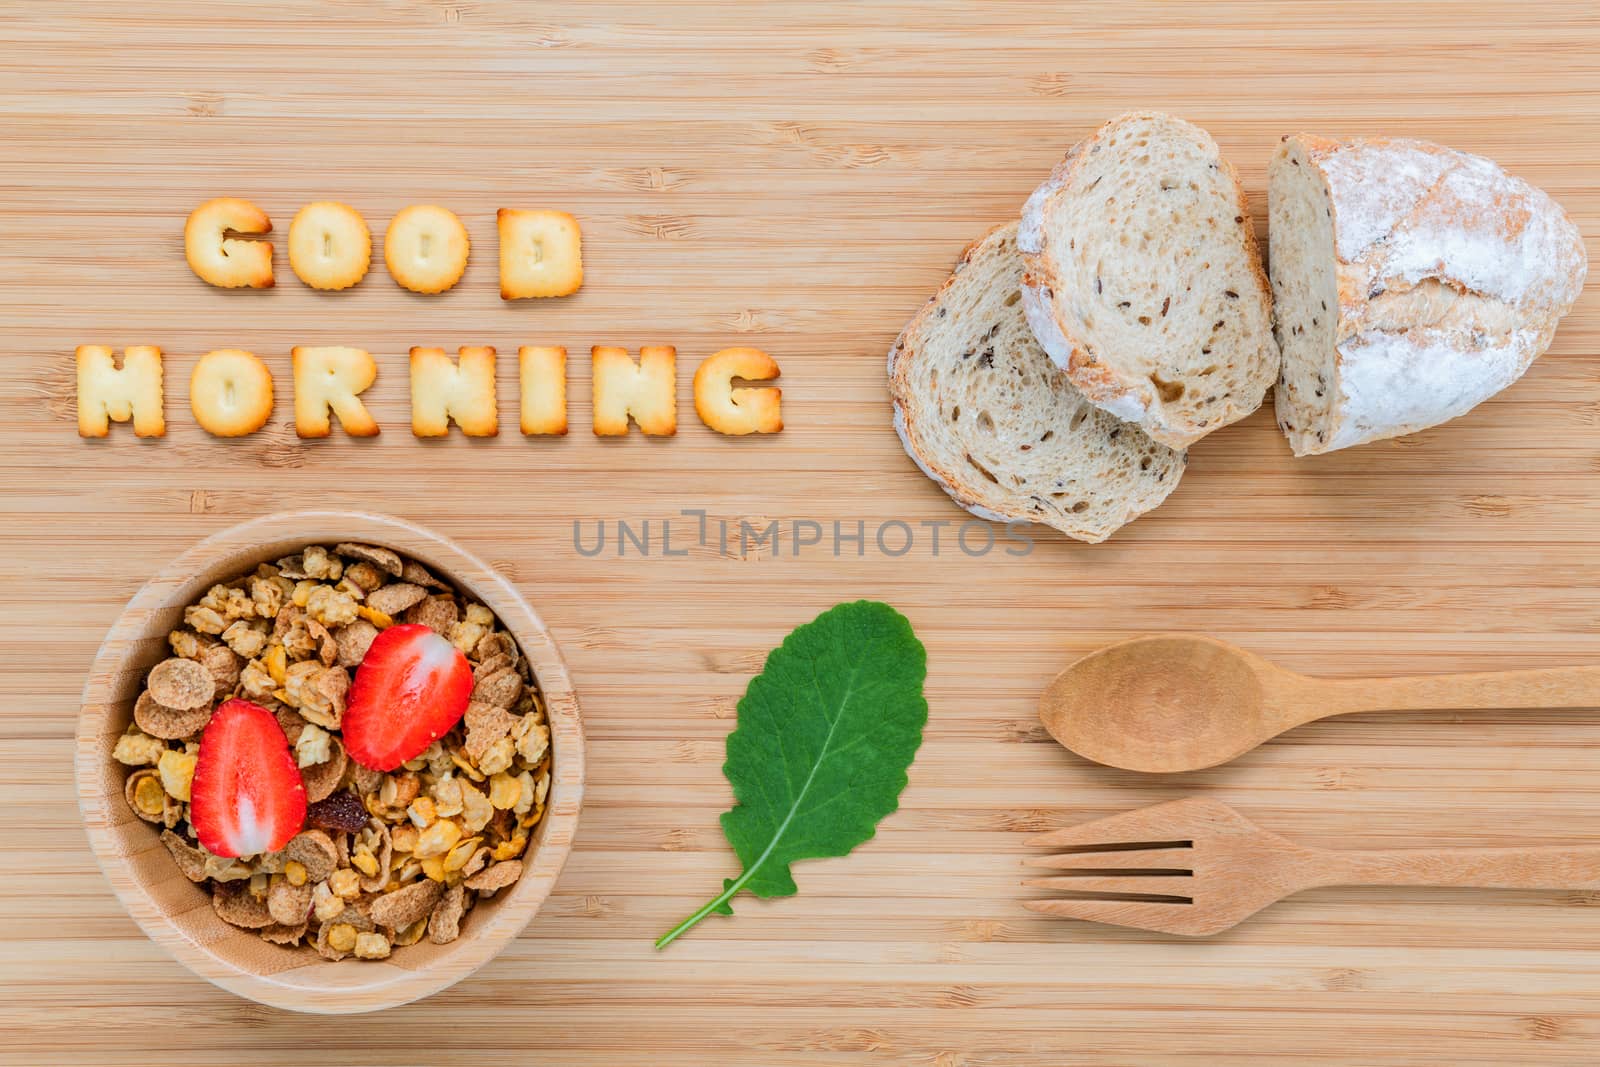 Good morning concept - Cereal in wooden bowl with strawberry and wooden spoon set up on wooden background.